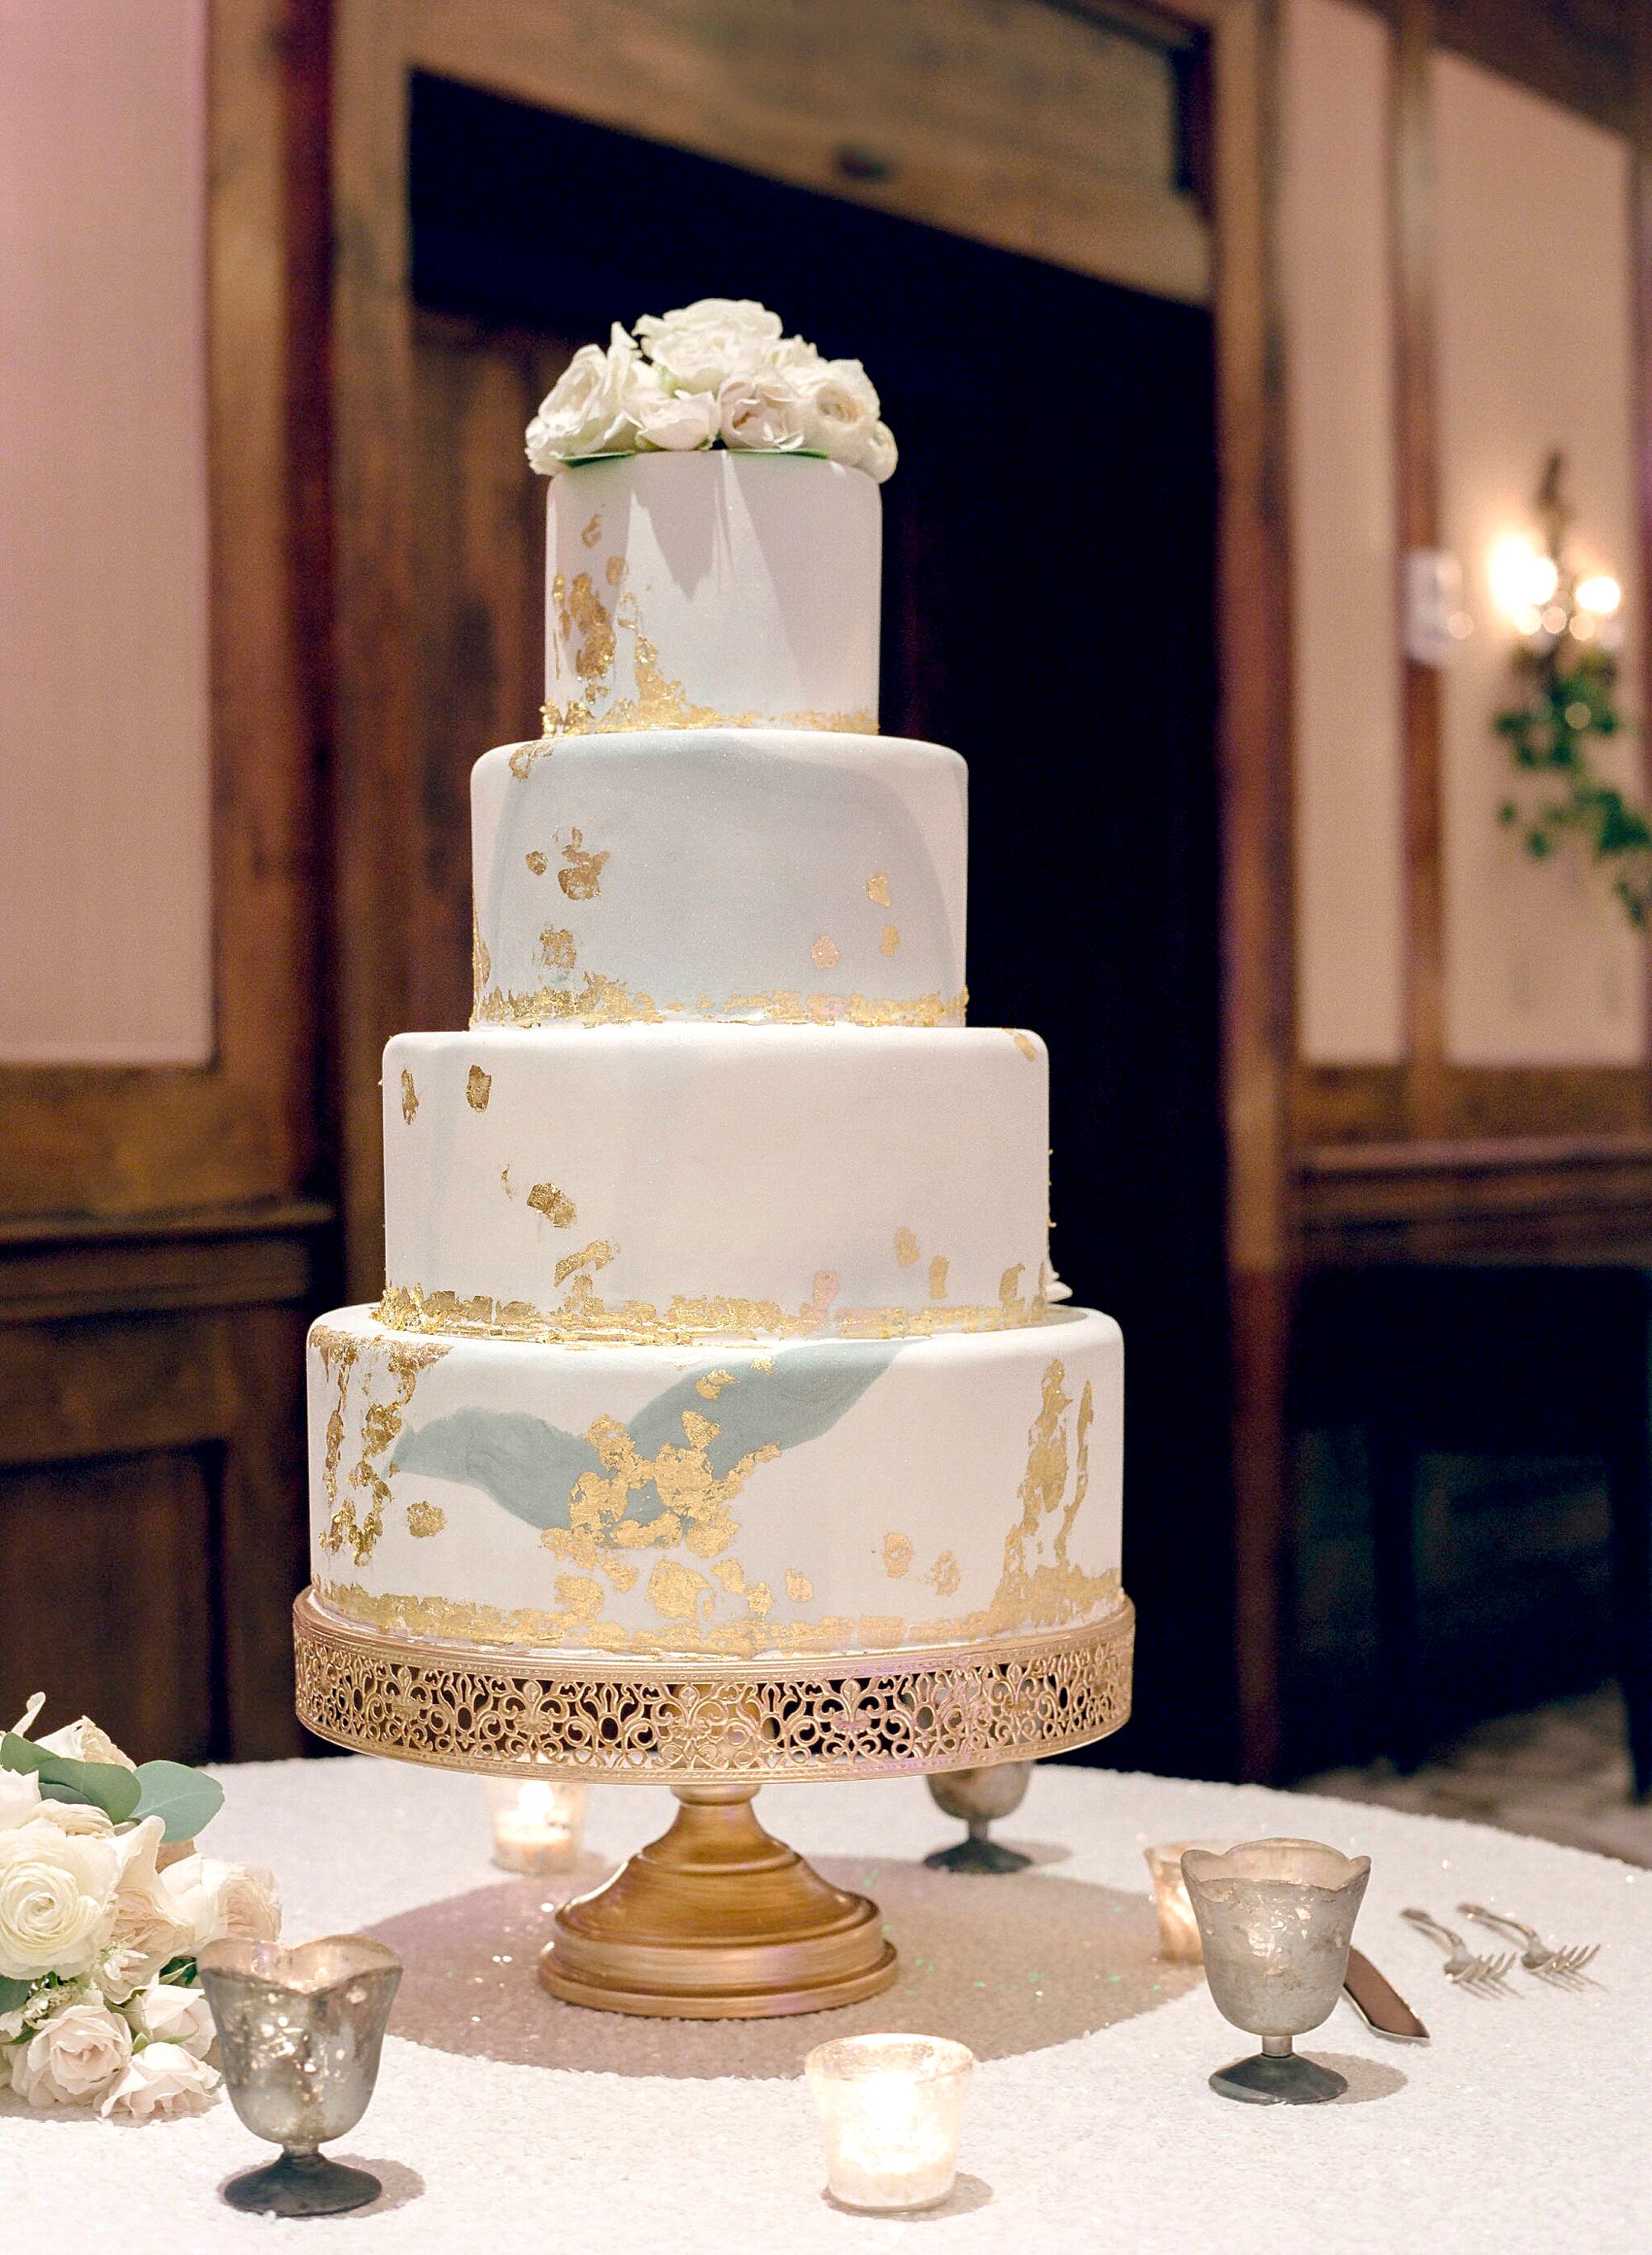 Fondant and Gold Leaf 3 Tier Cake Project